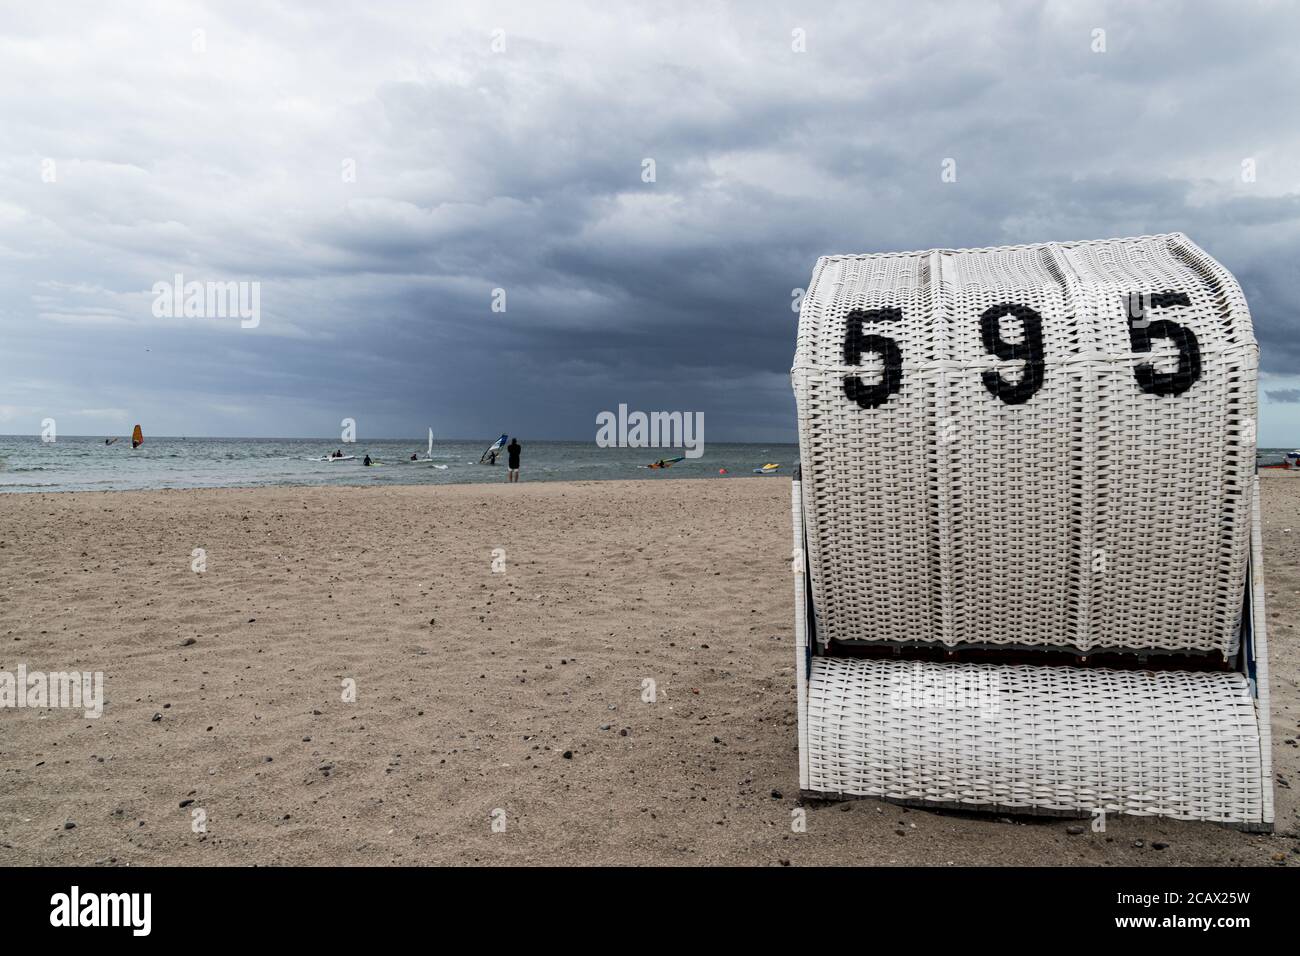 View of one white wicker beach chair on sandy beach at the Baltic Sea in Germany on a cloudy day. Royalty free stock photo. Stock Photo